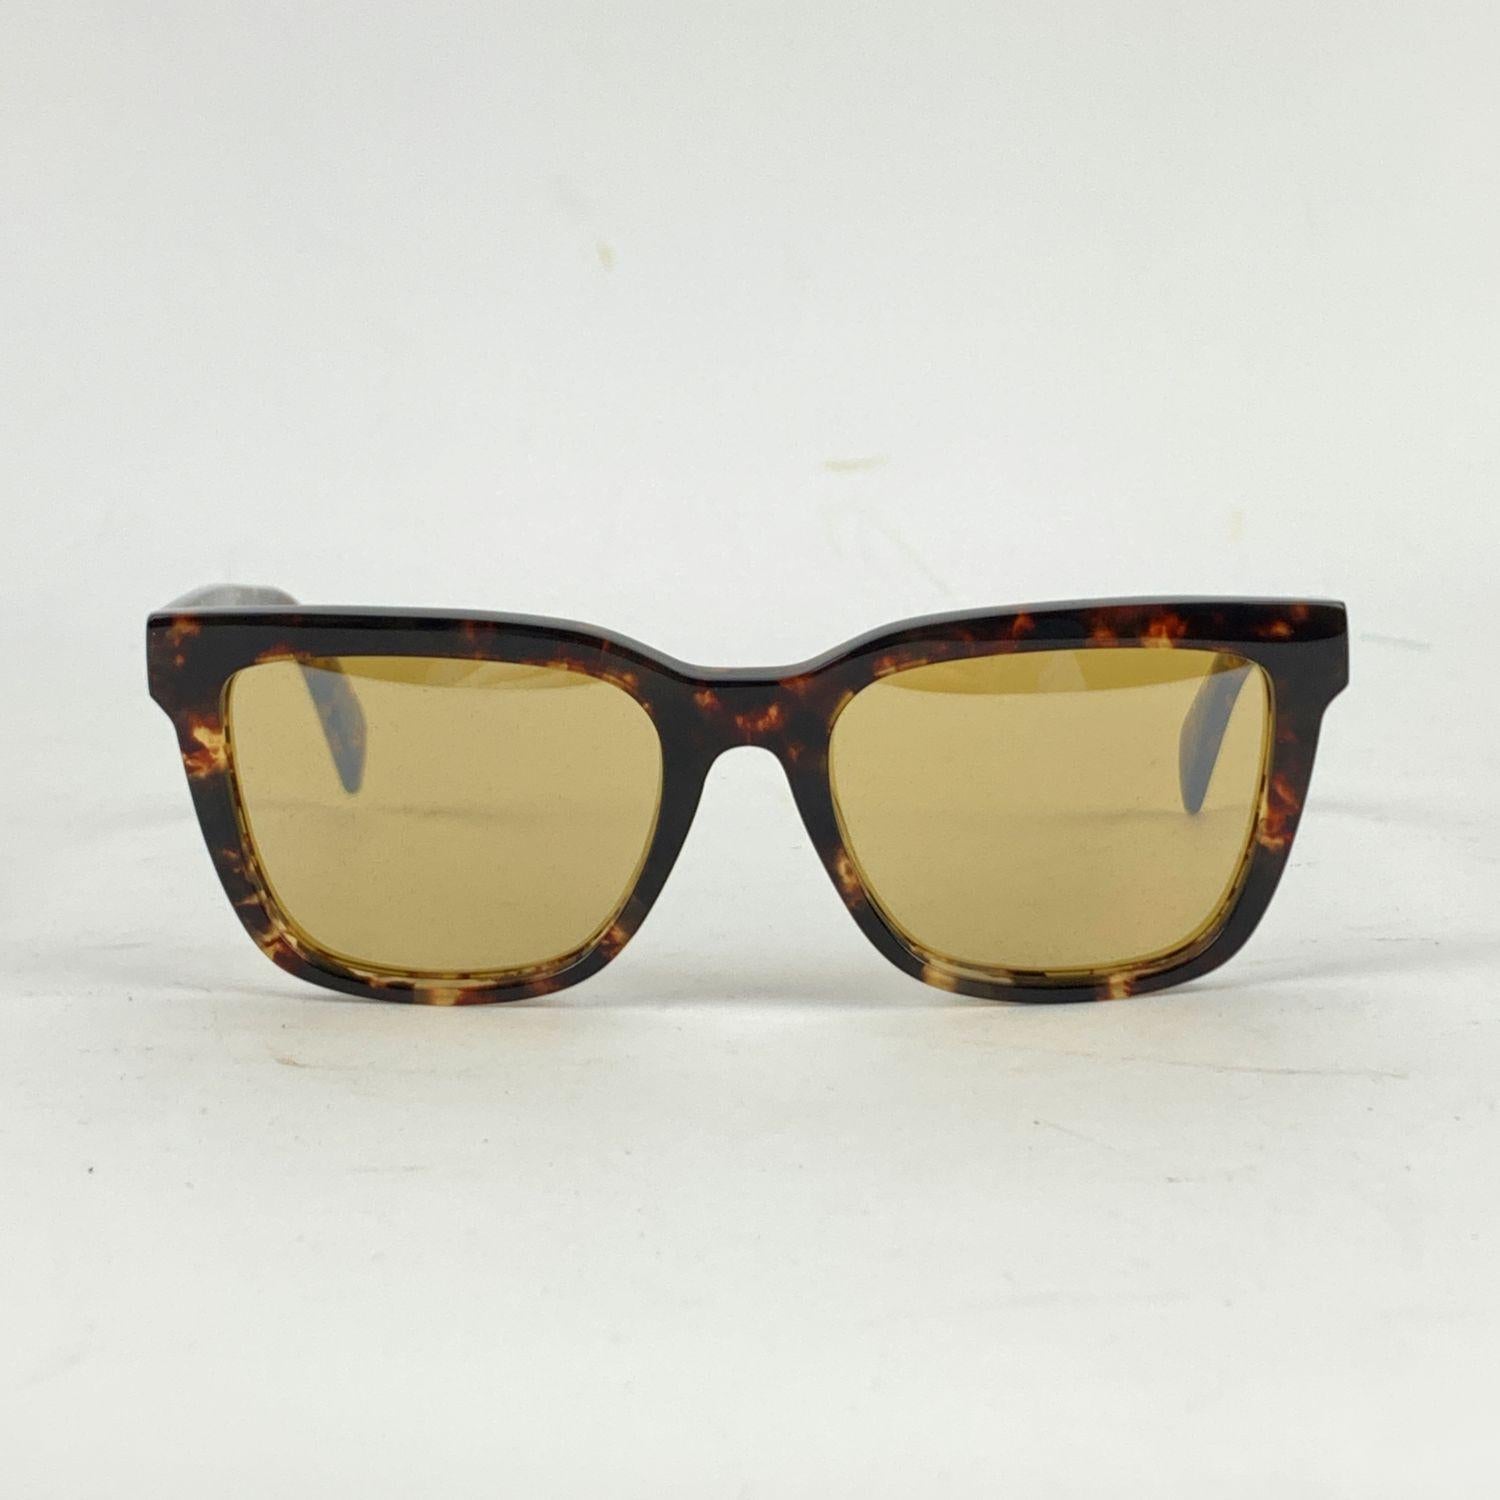 Beautiful Just Cavalli Mod JC865S - 56J sunglasses. Brown acetate frame. Original mirrored lenses. Made in Italy.




Details

MATERIAL: Plastic

COLOR: Brown

MODEL: JC865S 56J

GENDER: Women

COUNTRY OF MANUFACTURE: Italy

TYPE: